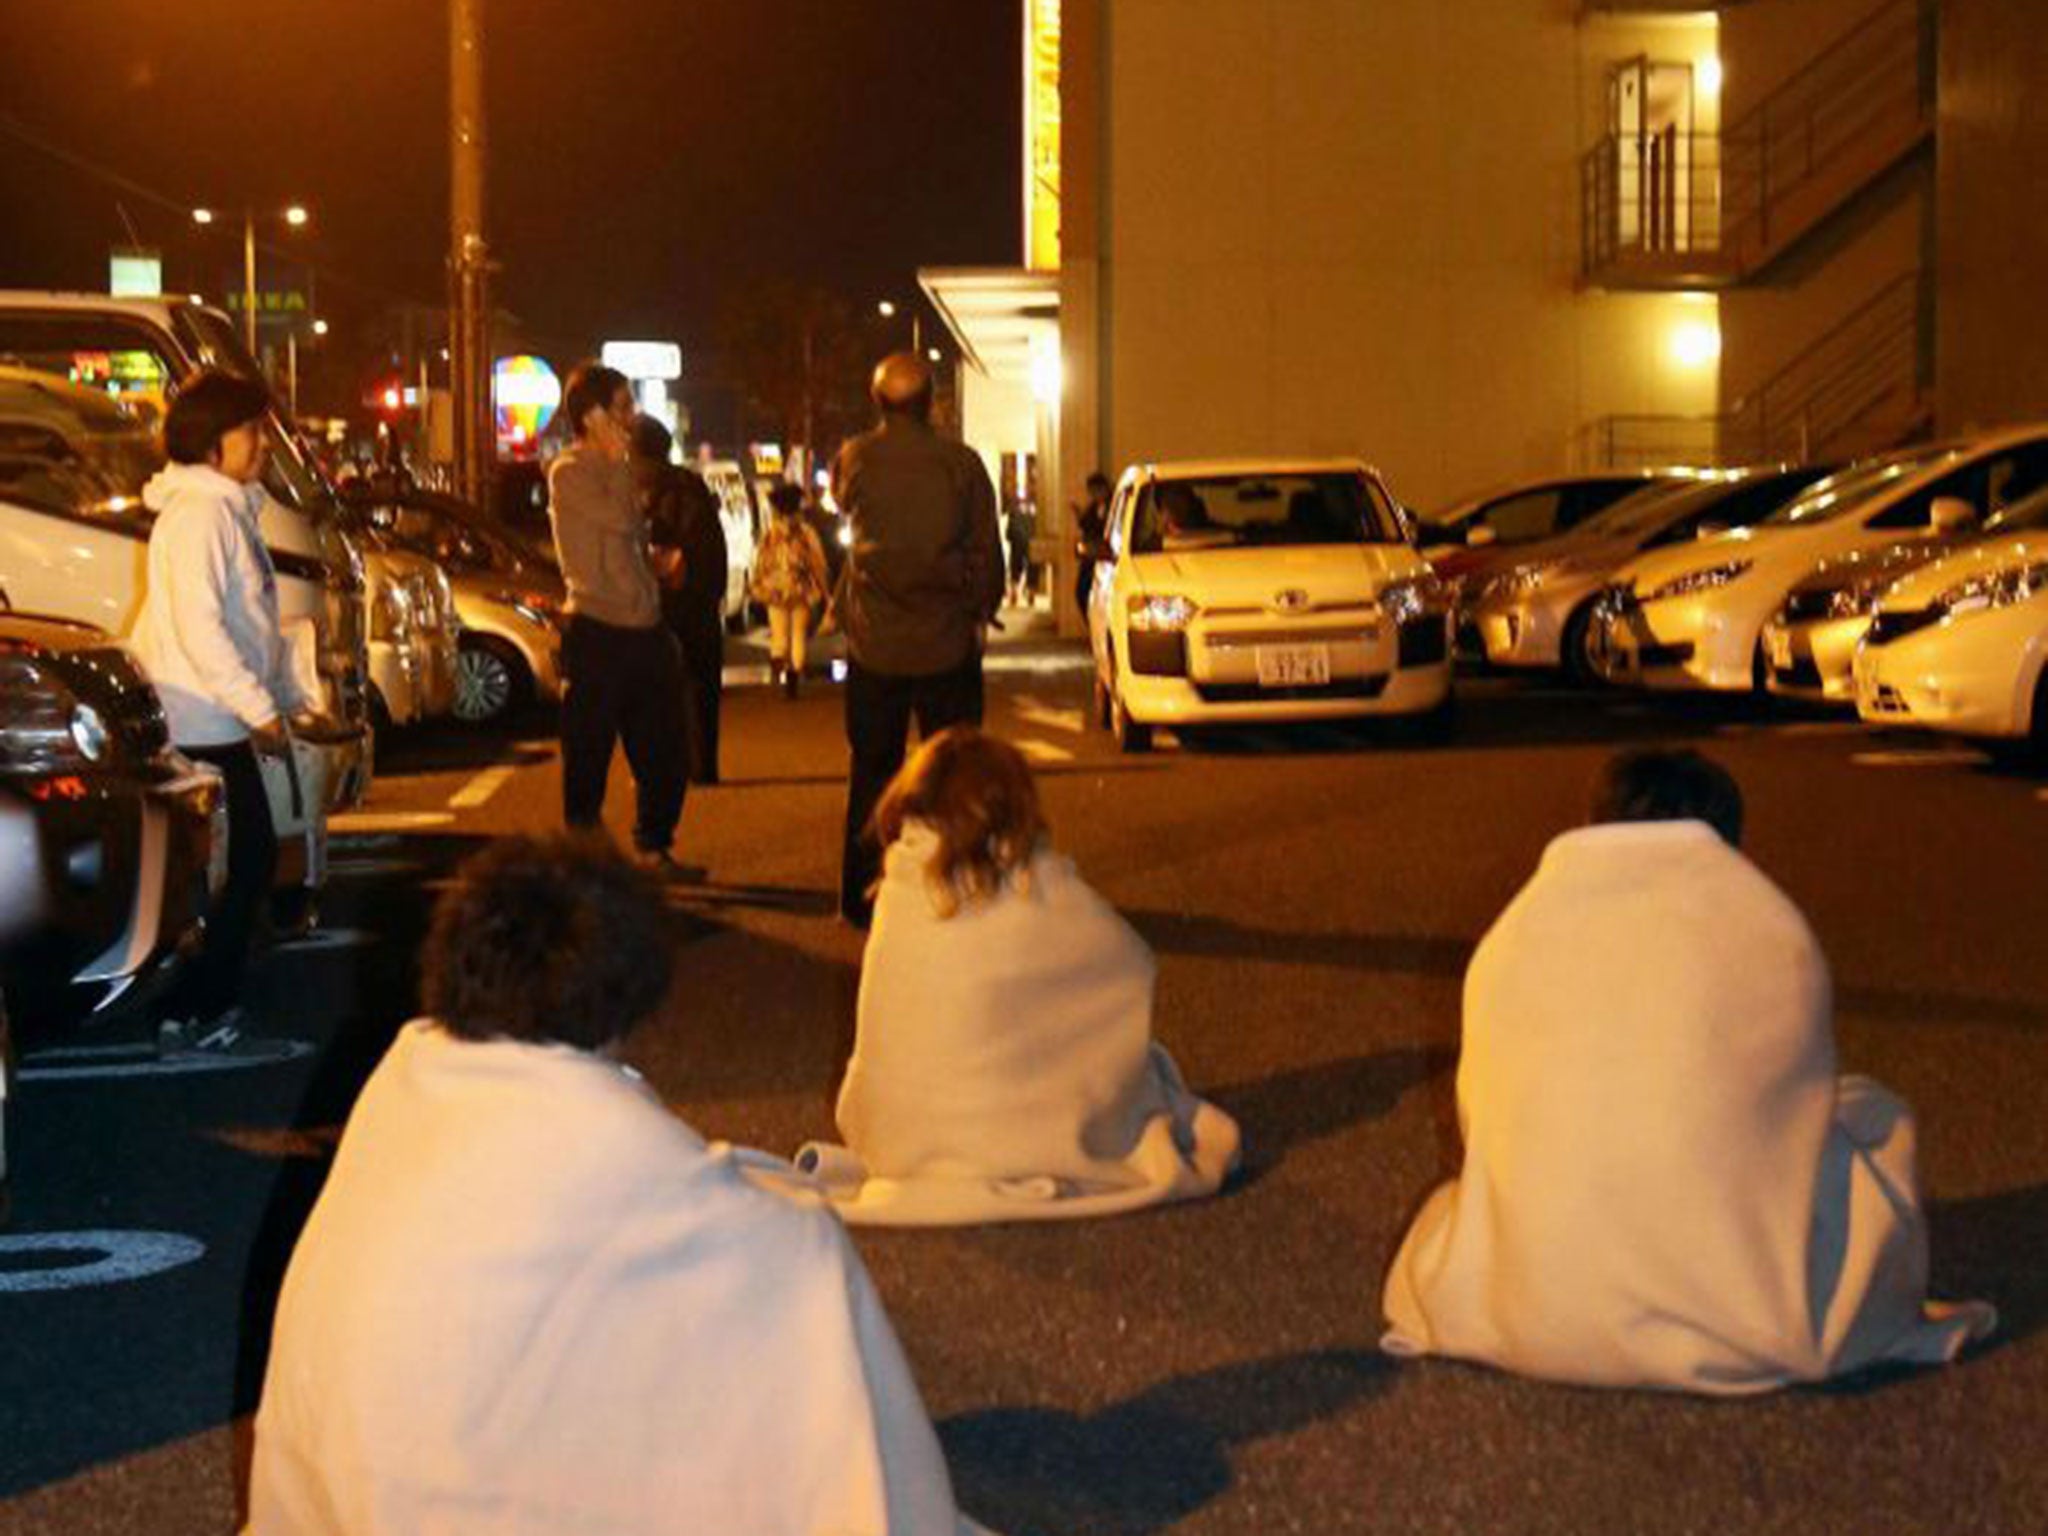 Hotel guests wait in a car park after being evacuated following the earthquake